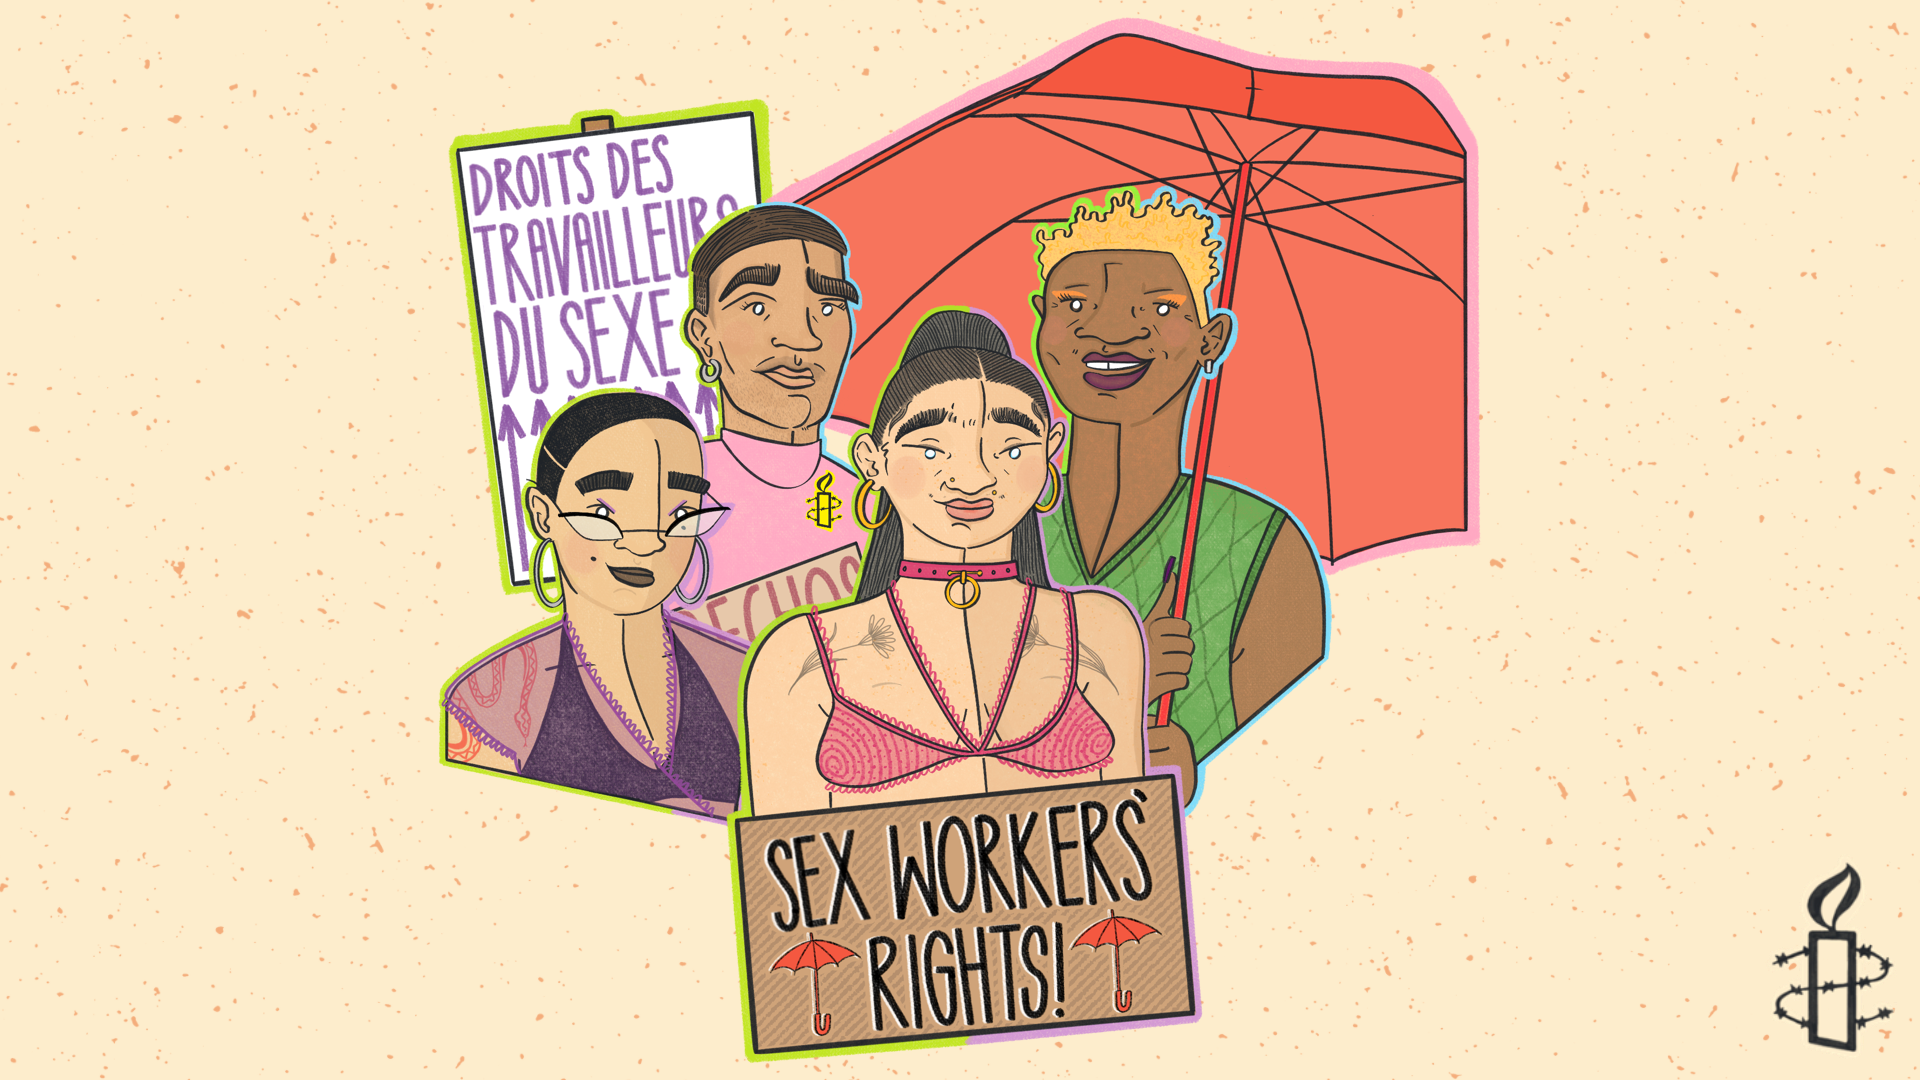 “Try listening to the people who actually know what’s going on”: sex workers in Ireland demand their human rights